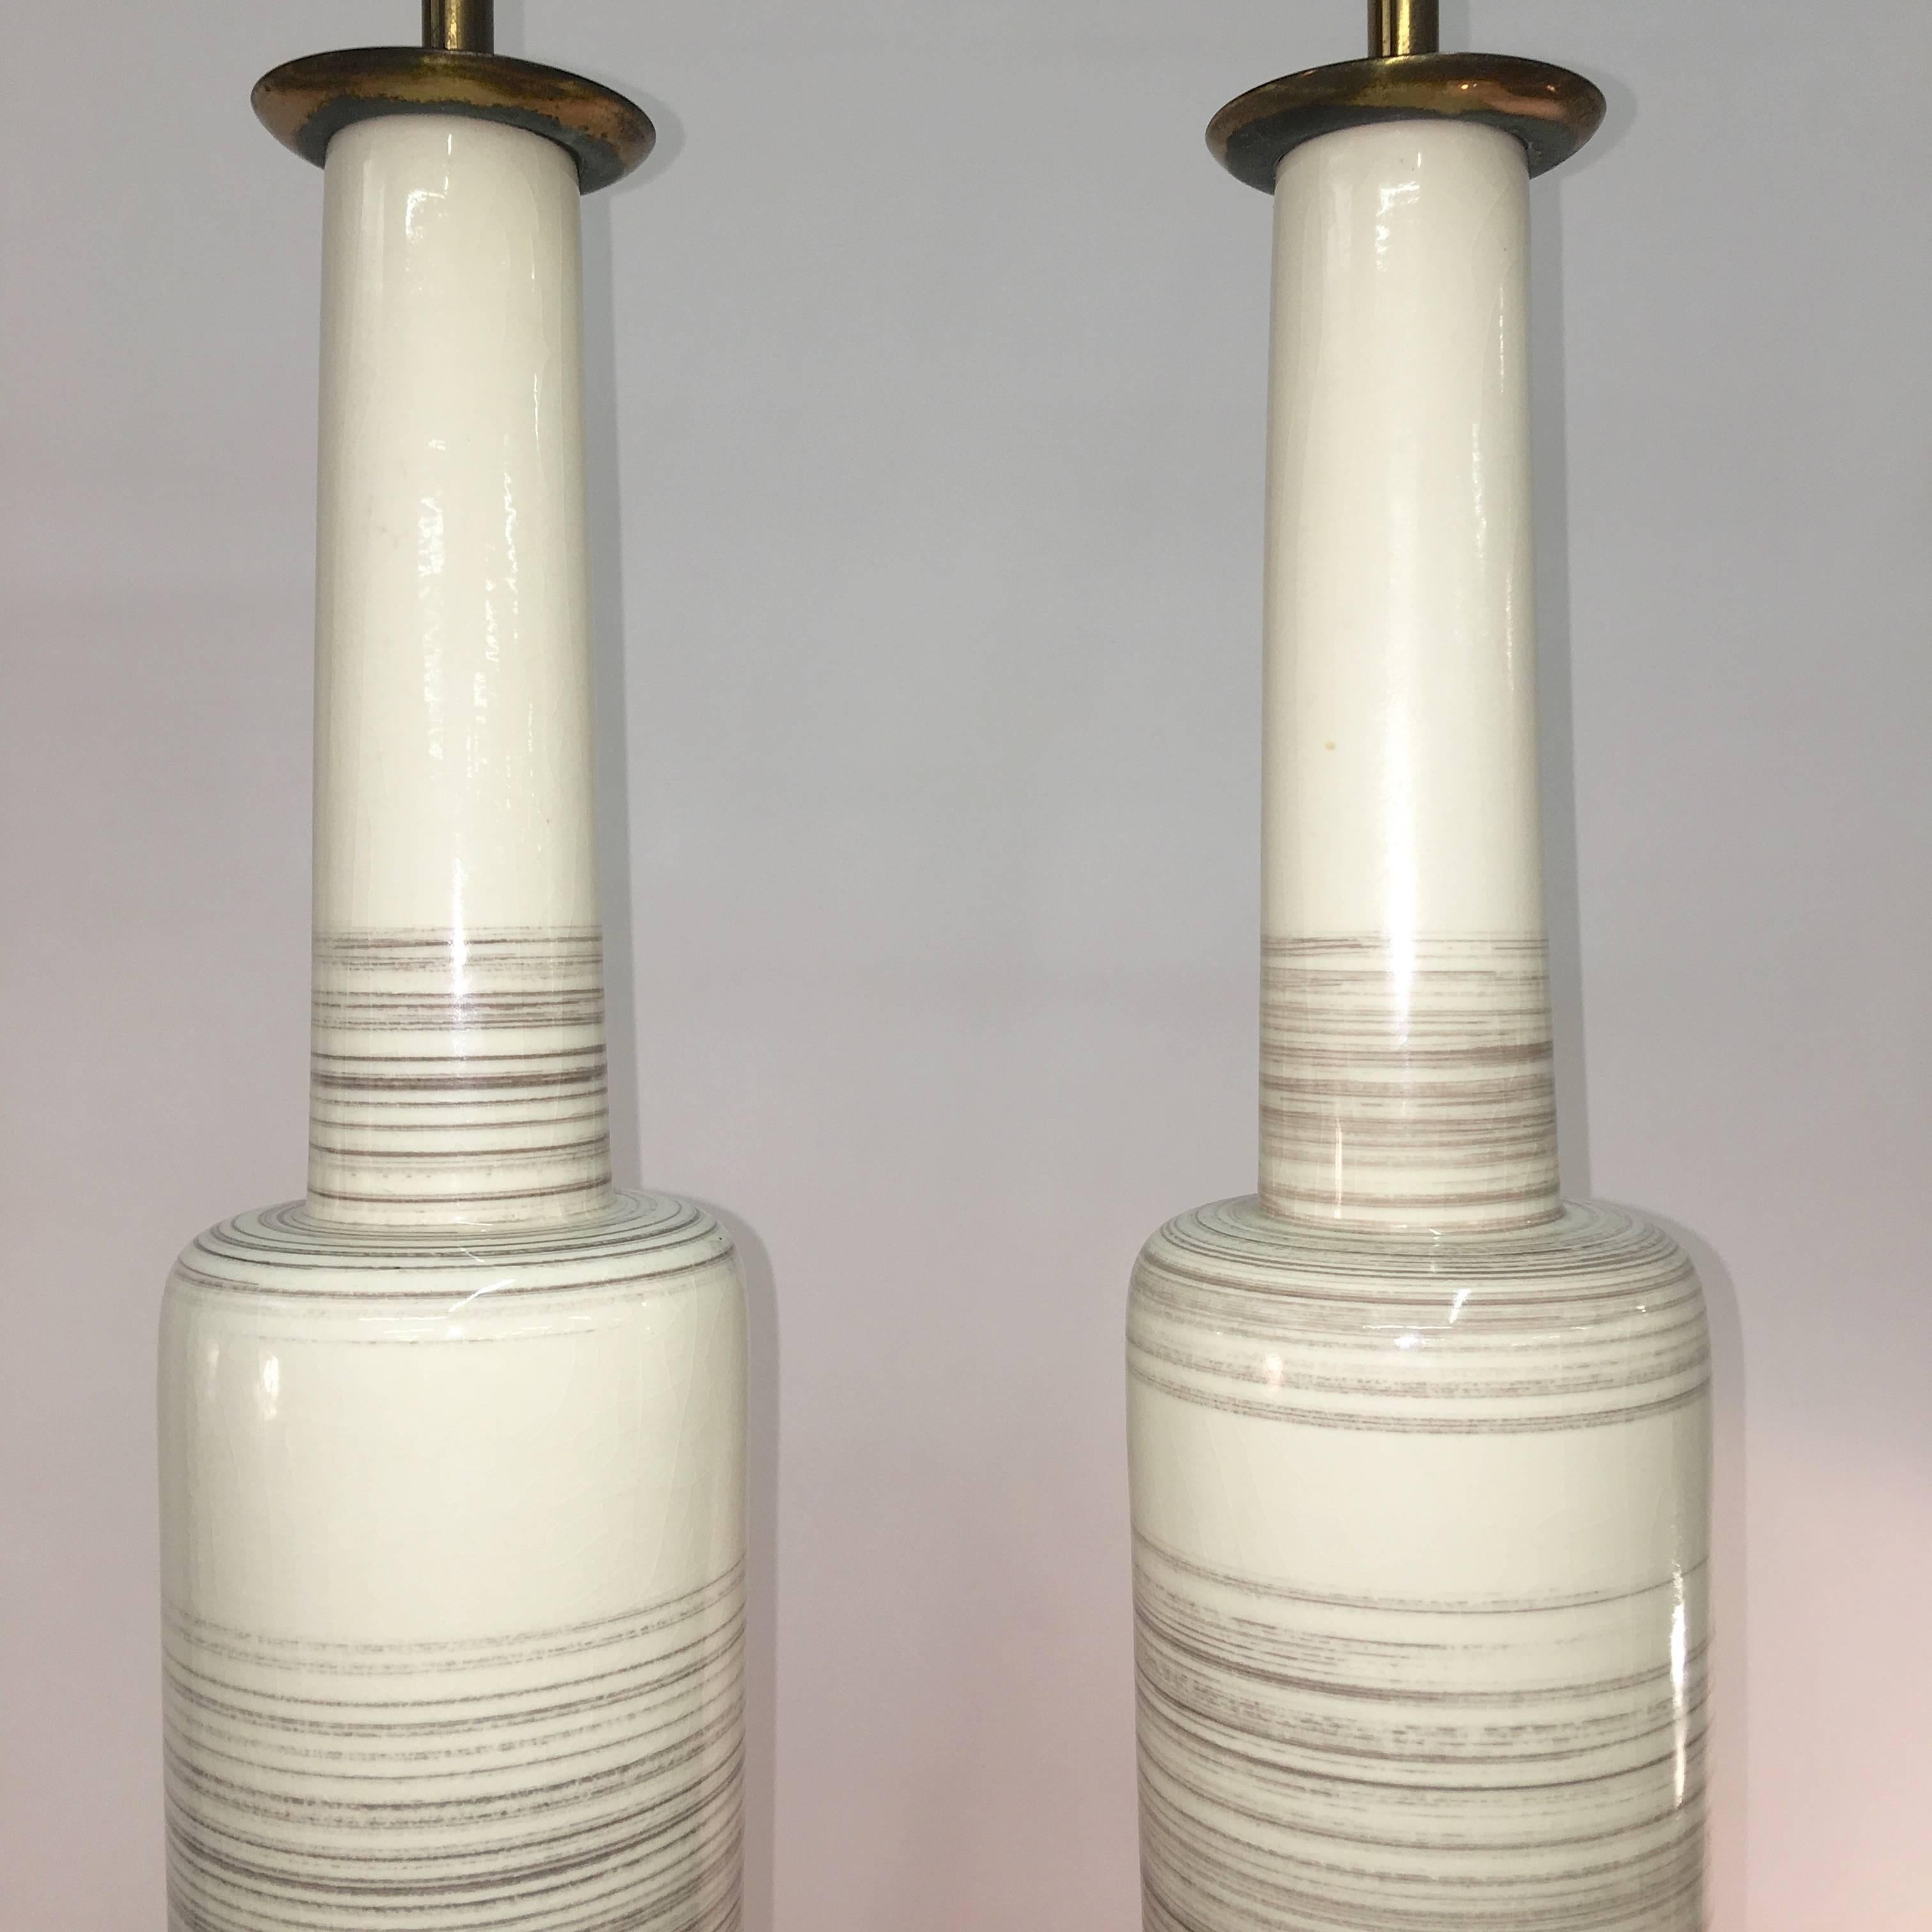 Pair of Stiffel Lamps in Glazed Ceramic Bottle Form For Sale 6